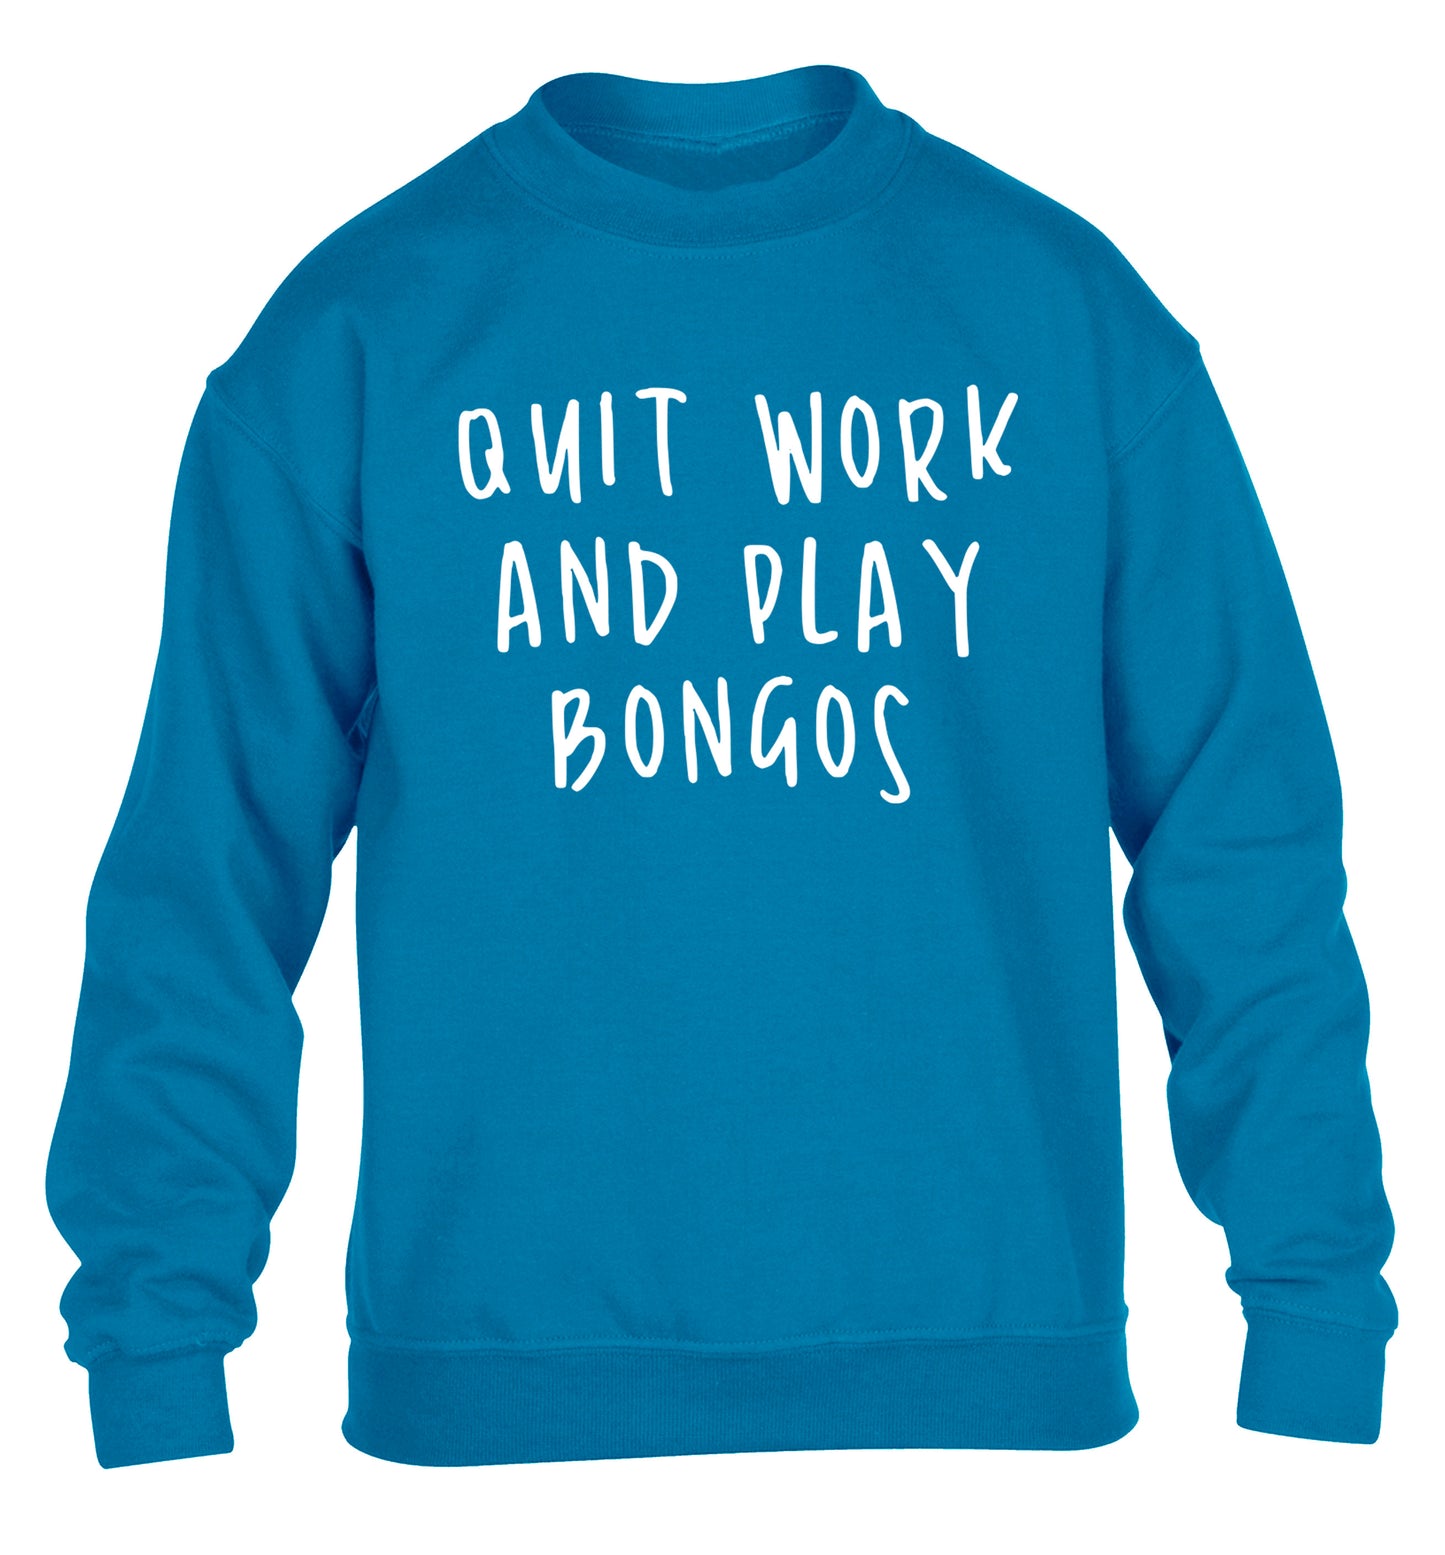 Quit work and play bongos children's blue sweater 12-14 Years